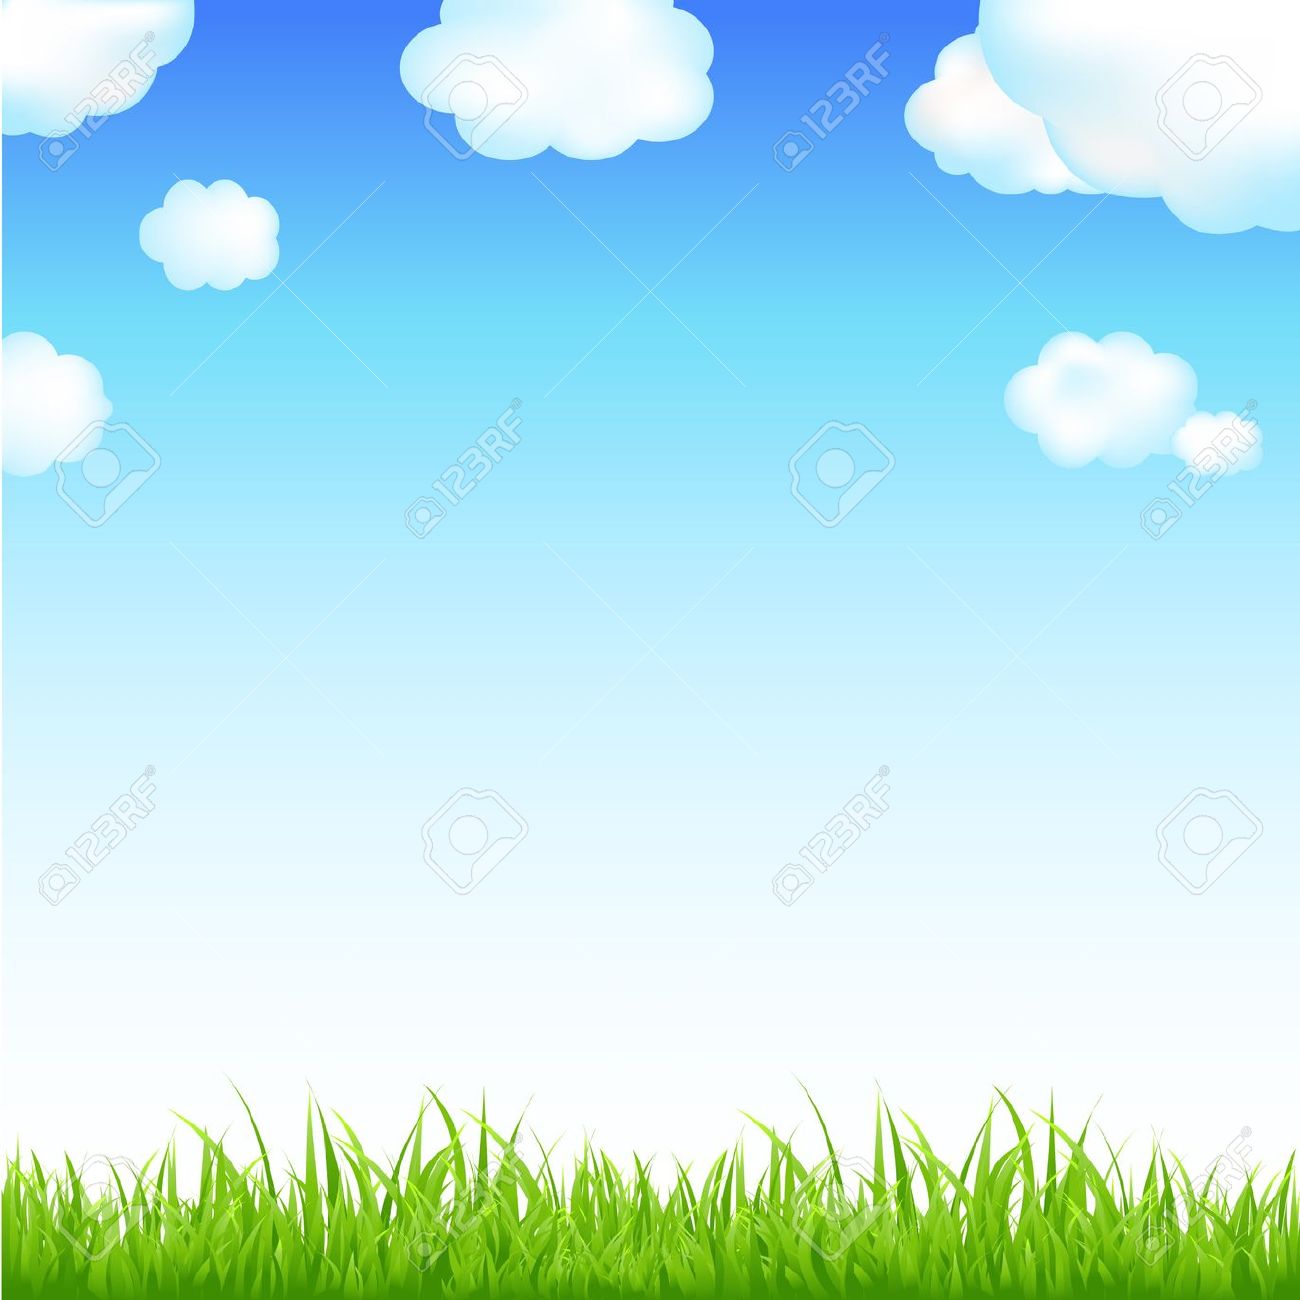 Open field clipart - Clipground